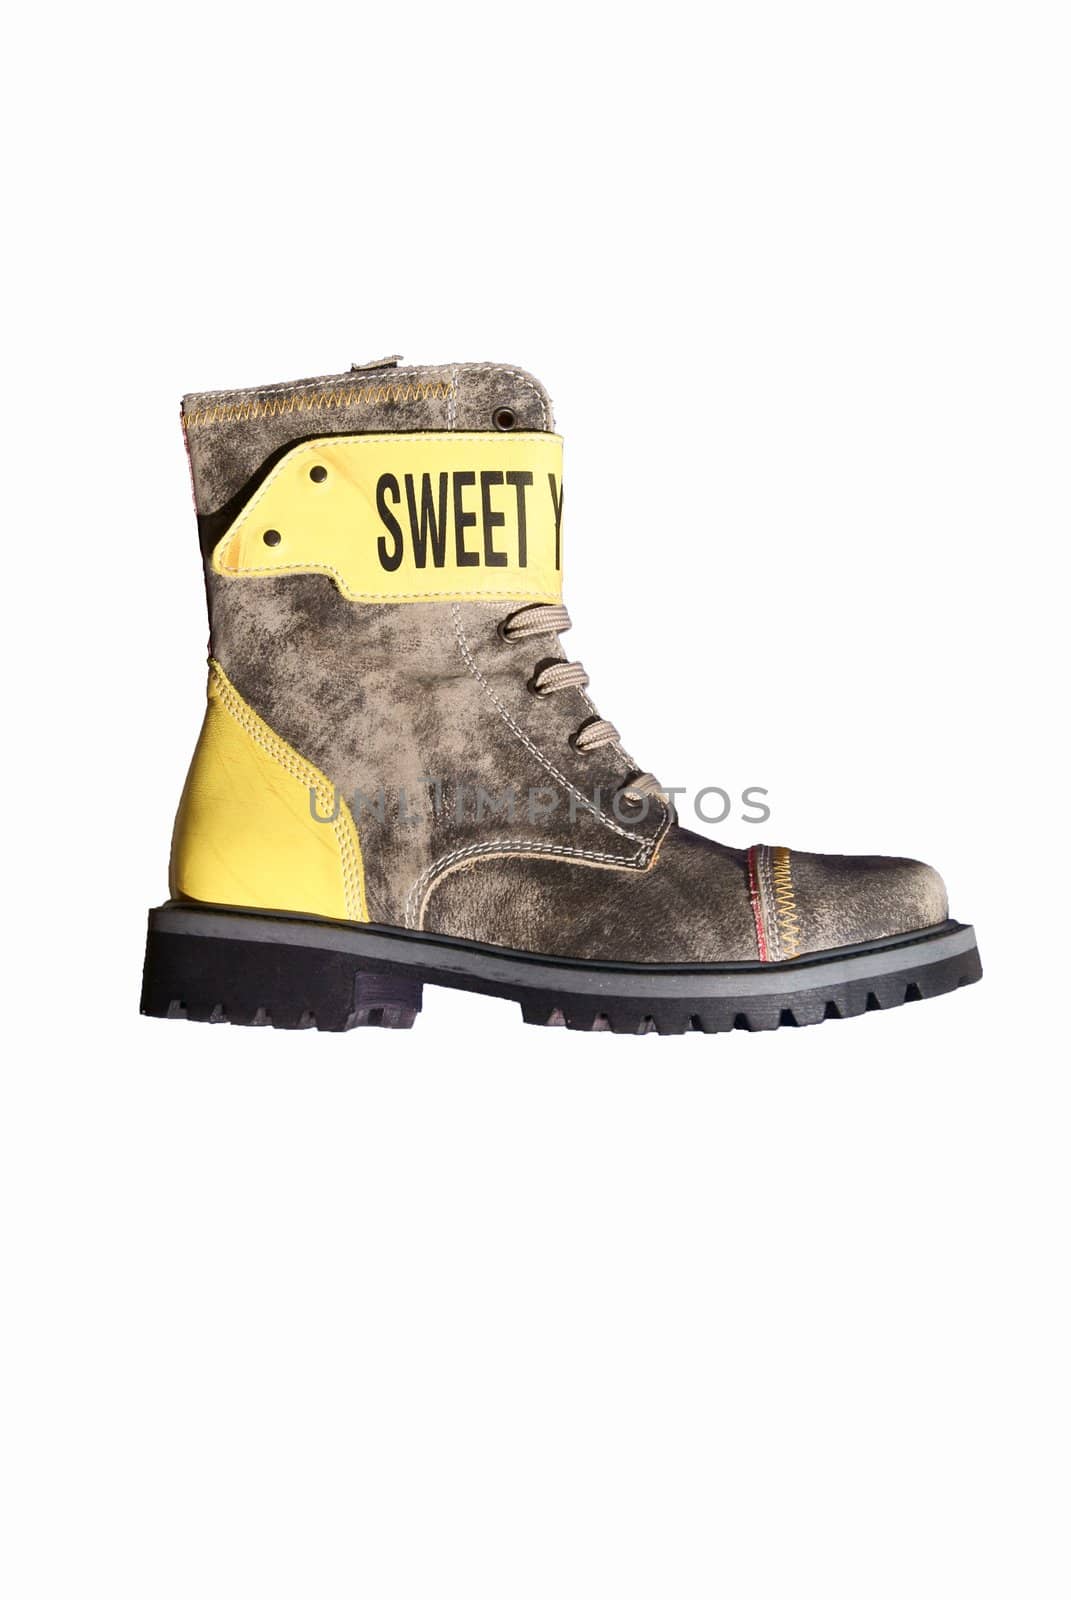 the autumnal leather boots yellow and strong